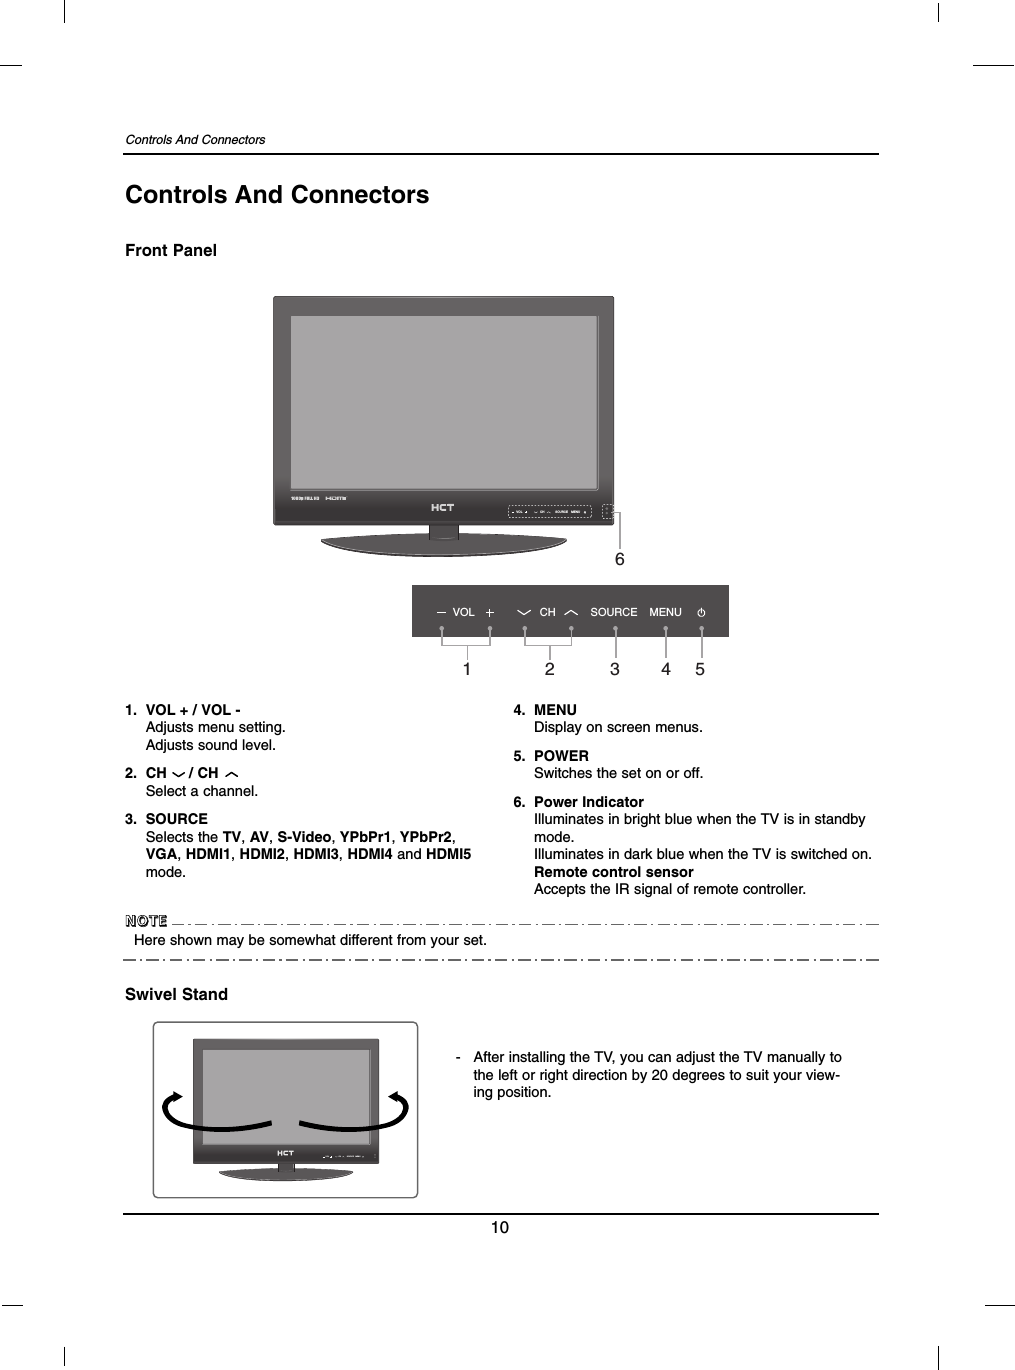 Controls And Connectors10Controls And ConnectorsFront PanelVOL SOURCE MENUCH12345VOL SOURCE MENUCH61. VOL + / VOL -Adjusts menu setting.Adjusts sound level.2. CH     / CH Select a channel.3. SOURCESelects the TV, AV,S-Video,YPbPr1,YPbPr2,VGA,HDMI1,HDMI2,HDMI3,HDMI4 and HDMI5mode.4. MENUDisplay on screen menus.5. POWERSwitches the set on or off.6. Power IndicatorIlluminates in bright blue when the TV is in standbymode.Illuminates in dark blue when the TV is switched on.Remote control sensorAccepts the IR signal of remote controller.Here shown may be somewhat different from your set.NNNNOOOOTTTTEEEESwivel StandVOL SOURCE MENUCH-After installing the TV, you can adjust the TV manually tothe left or right direction by 20 degrees to suit your view-ing position.